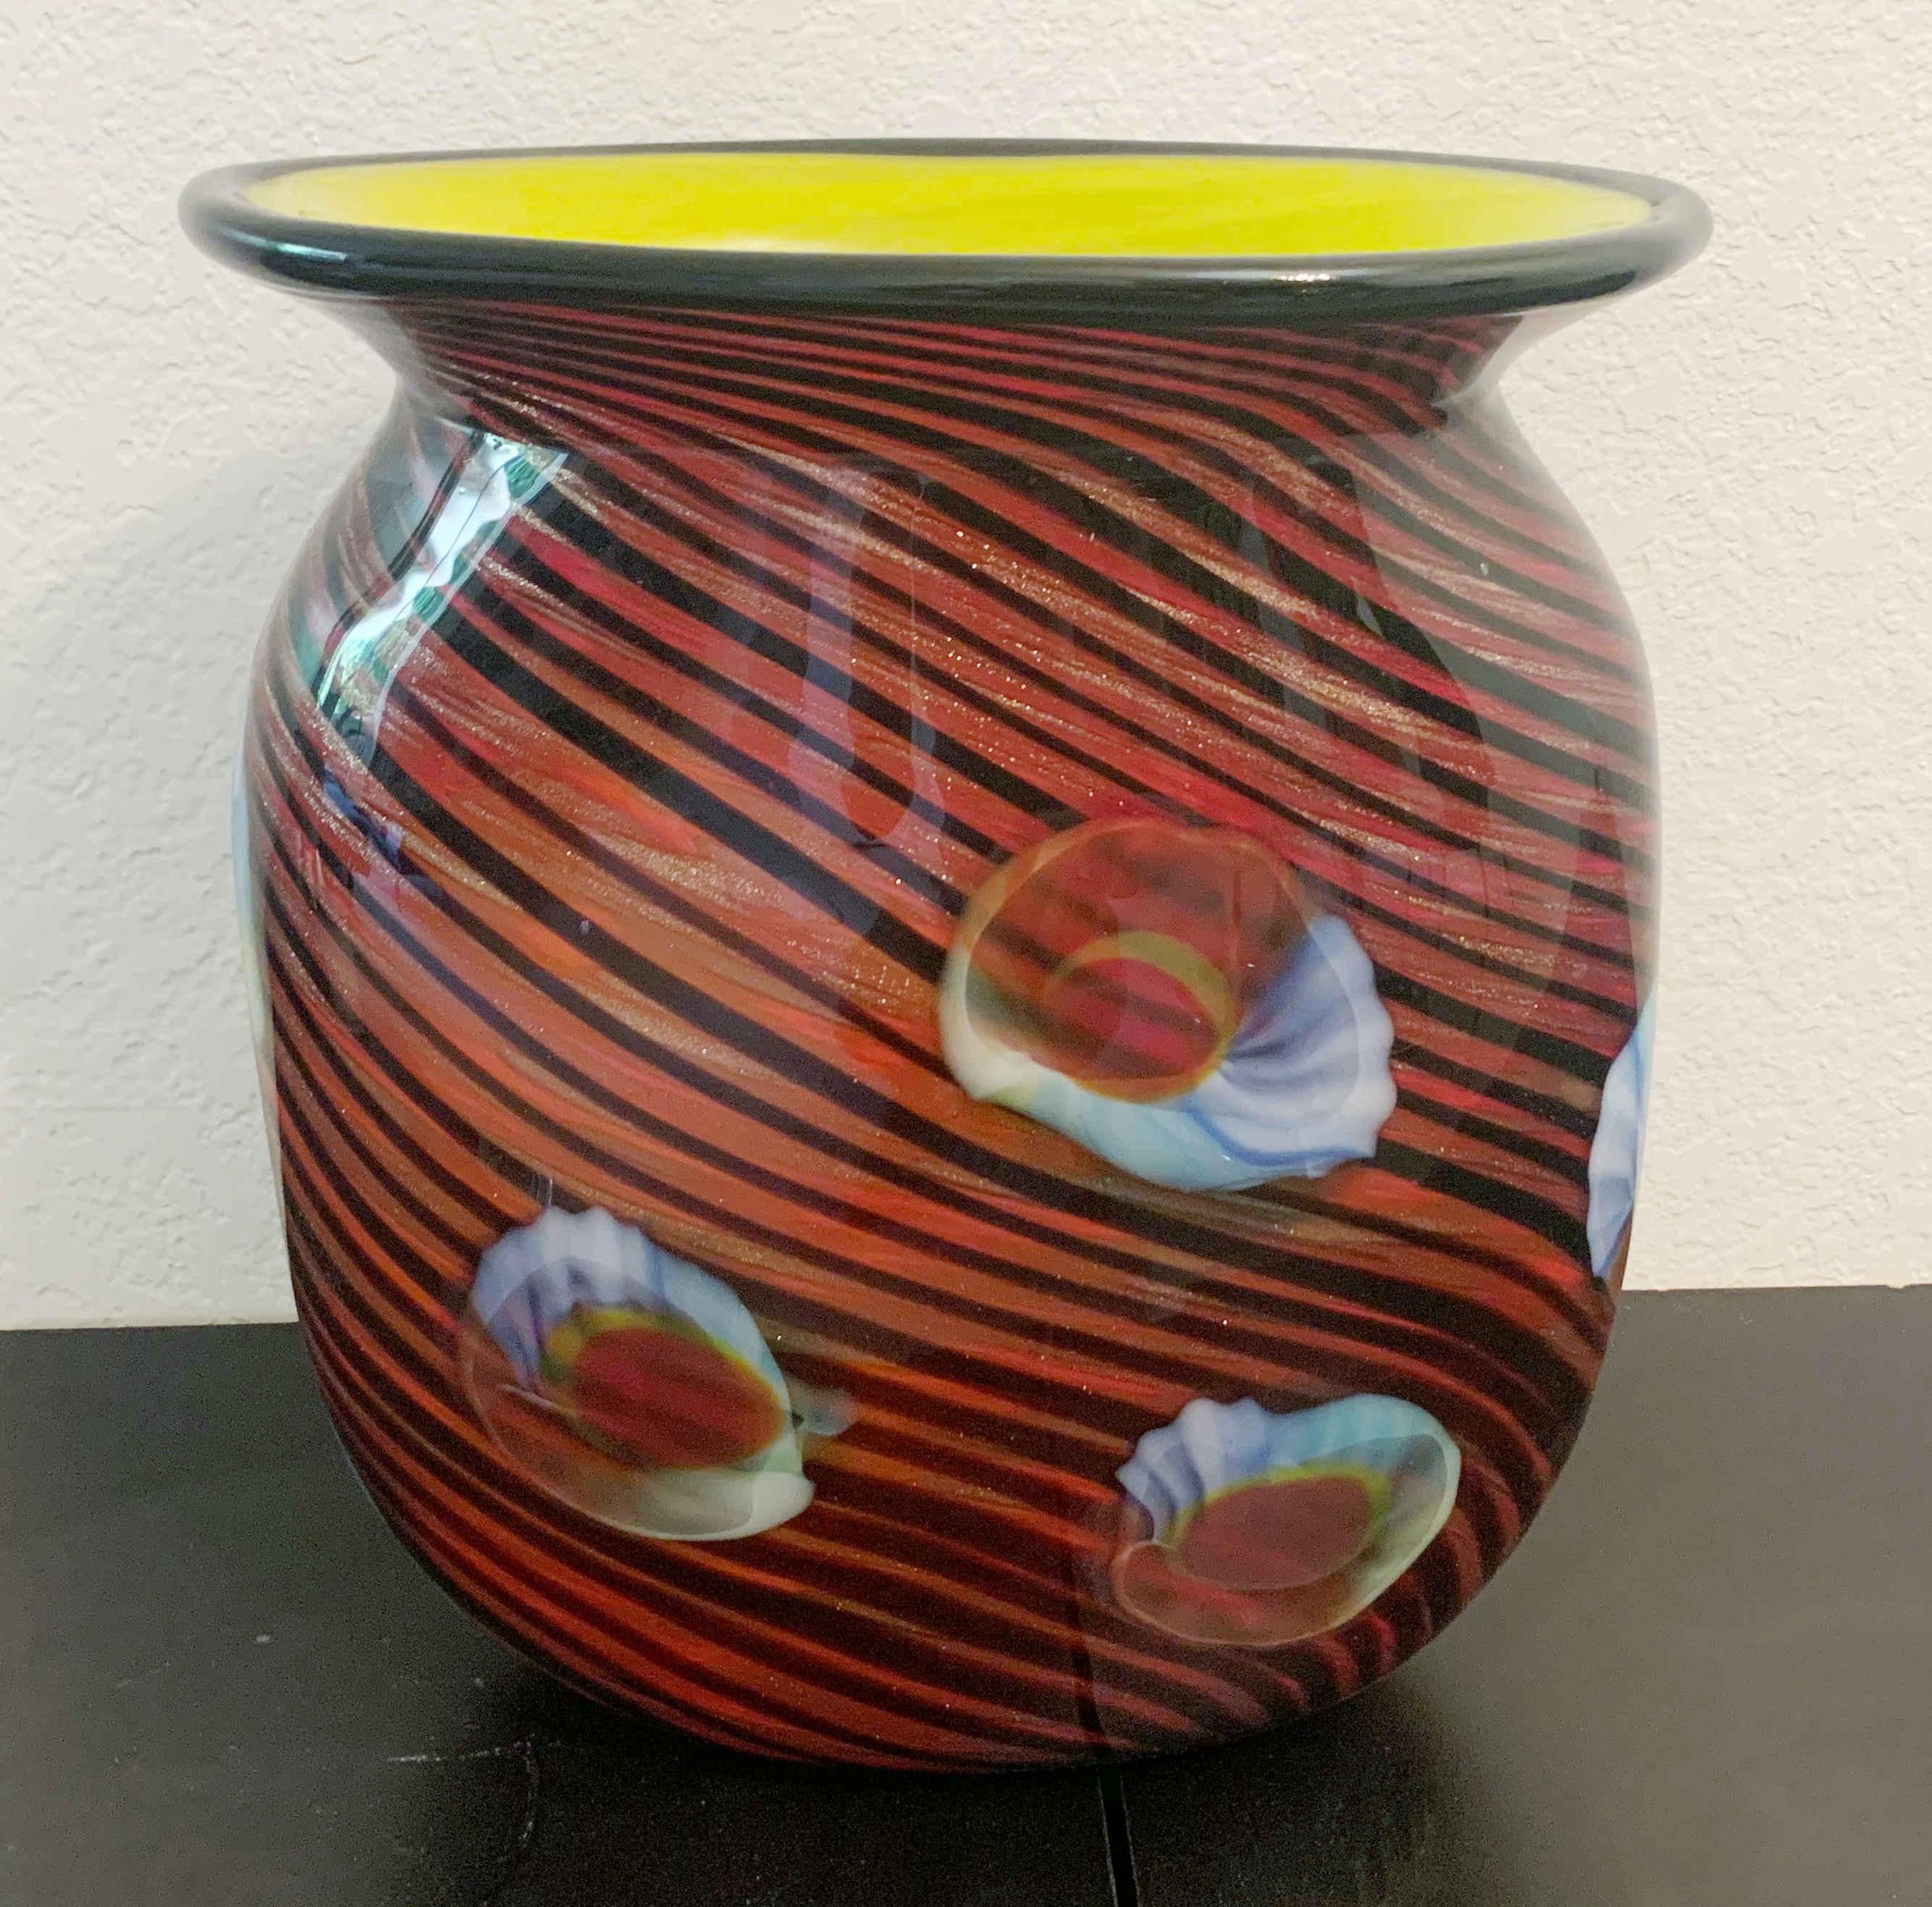 Vintage Italian Murano glass vase with dark red exterior and yellow interior, hand blown with black stripes throughout, infused with gold flecks and decorated with shell like figures / Made in Italy, circa 1970s
Measures: Height 13 inches, width 12